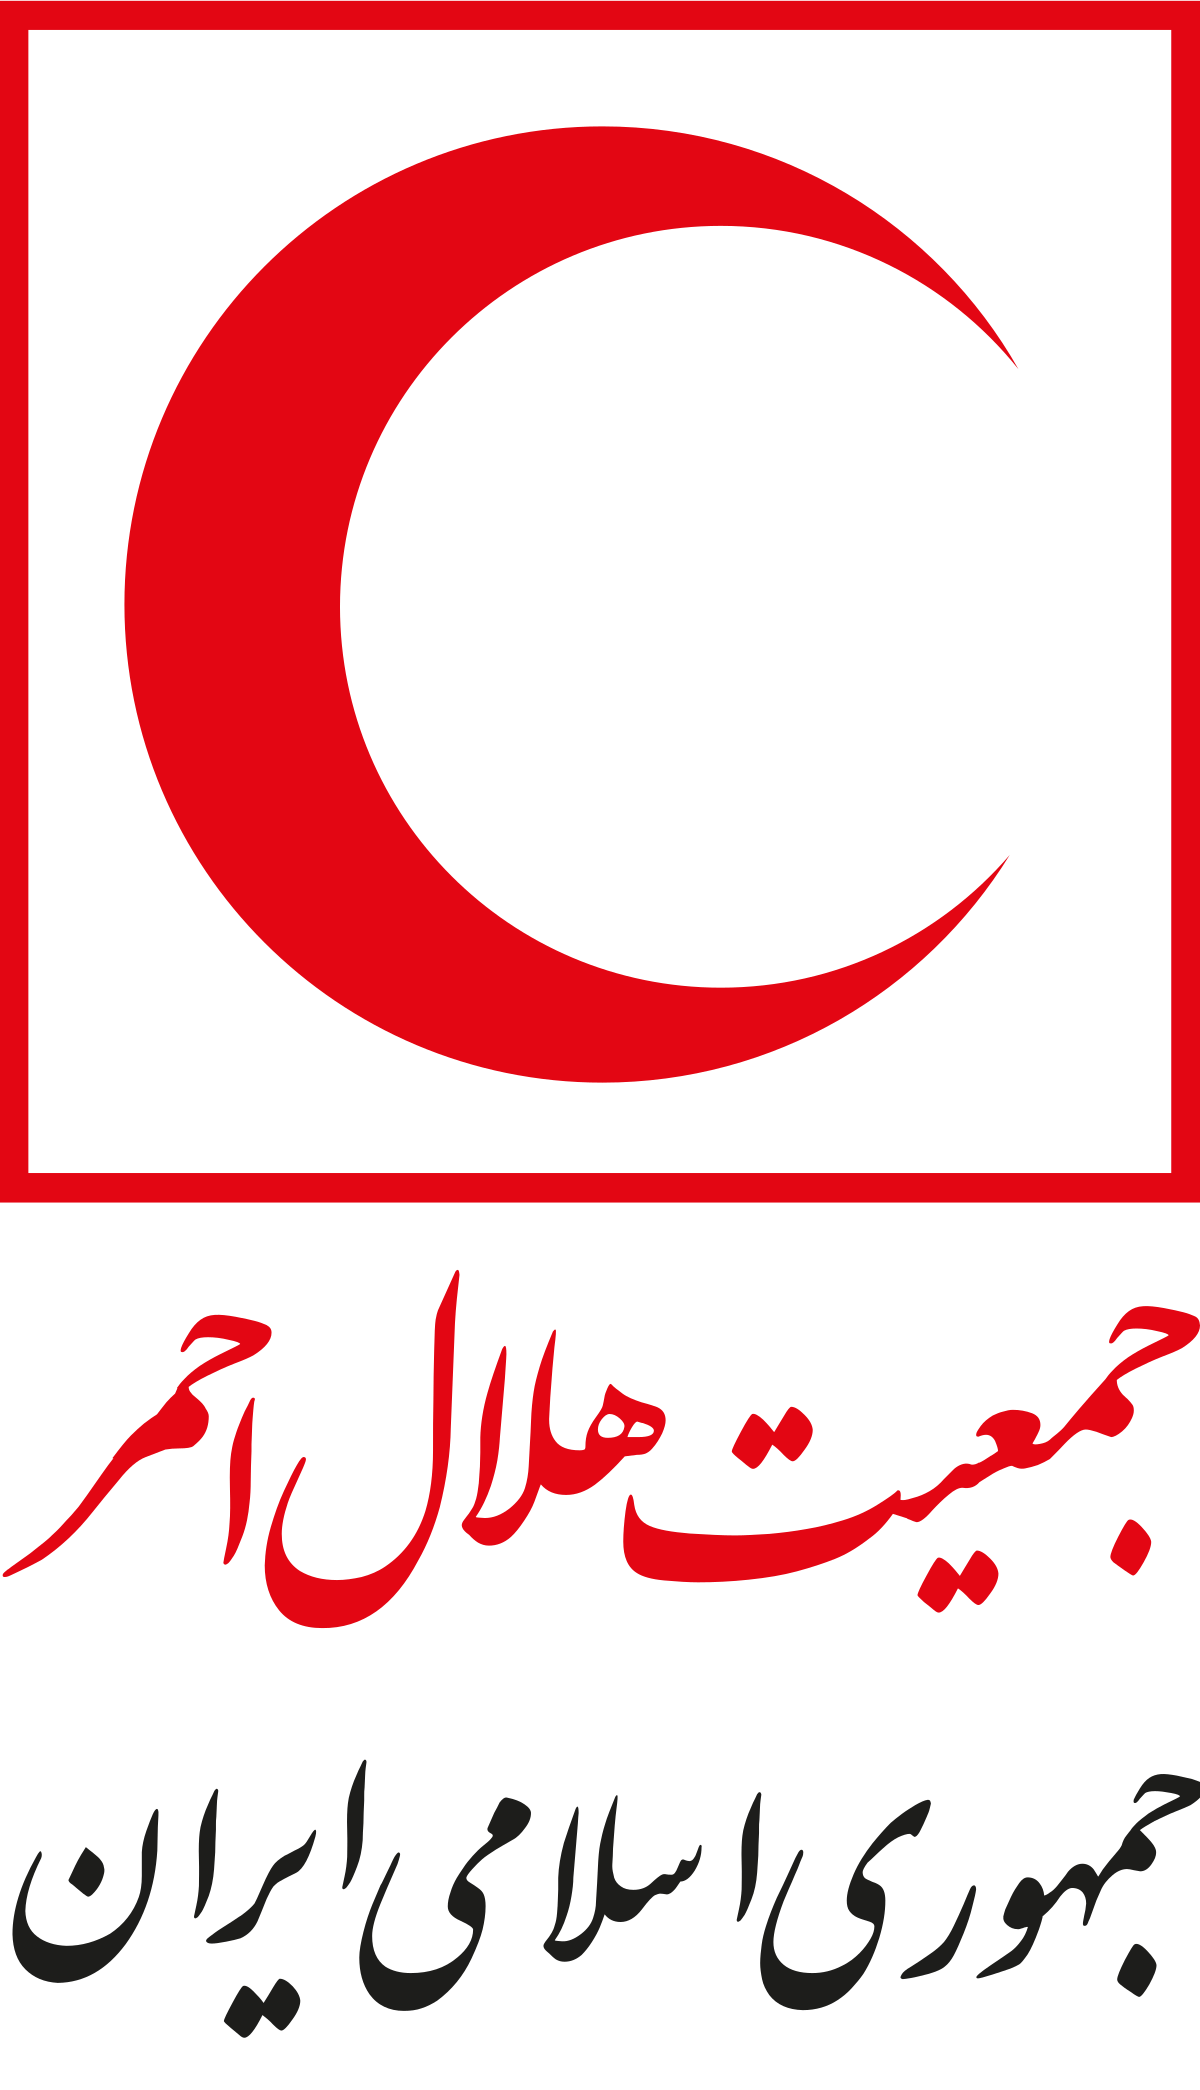 Red Crescent Logo - Iranian Red Crescent Society